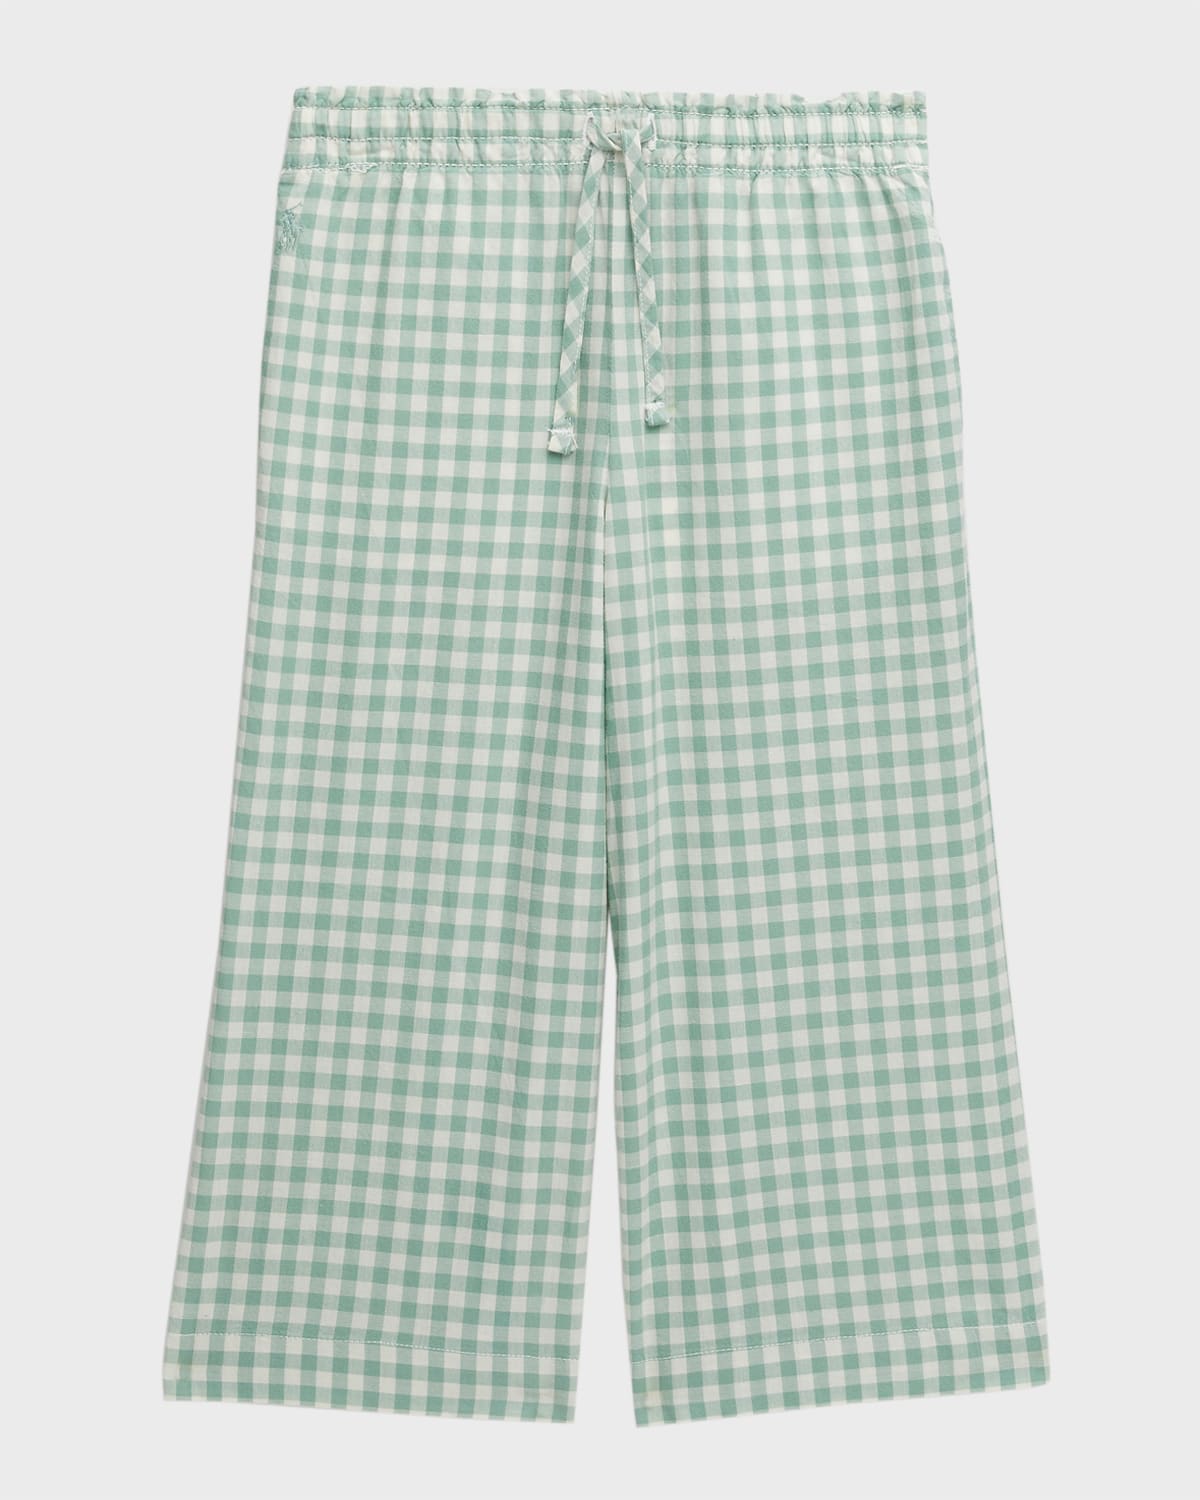 Girl's Gingham-Print Cropped Pants, Size 2-4